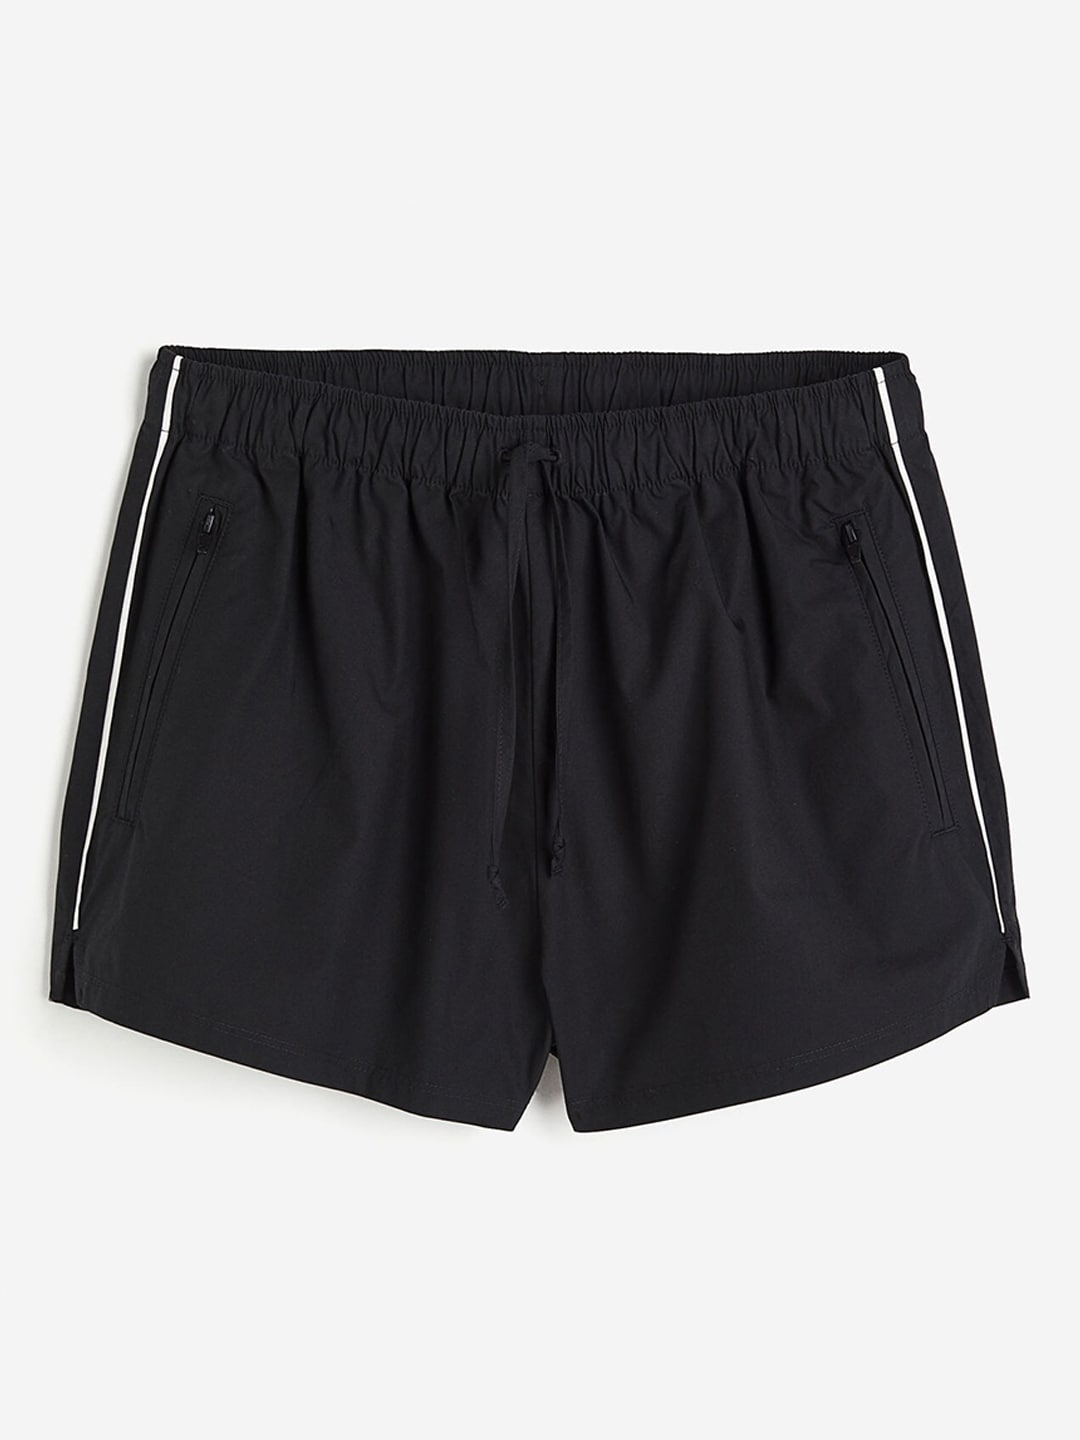 H&M Women Piping-Detail Pull-On Shorts Price in India